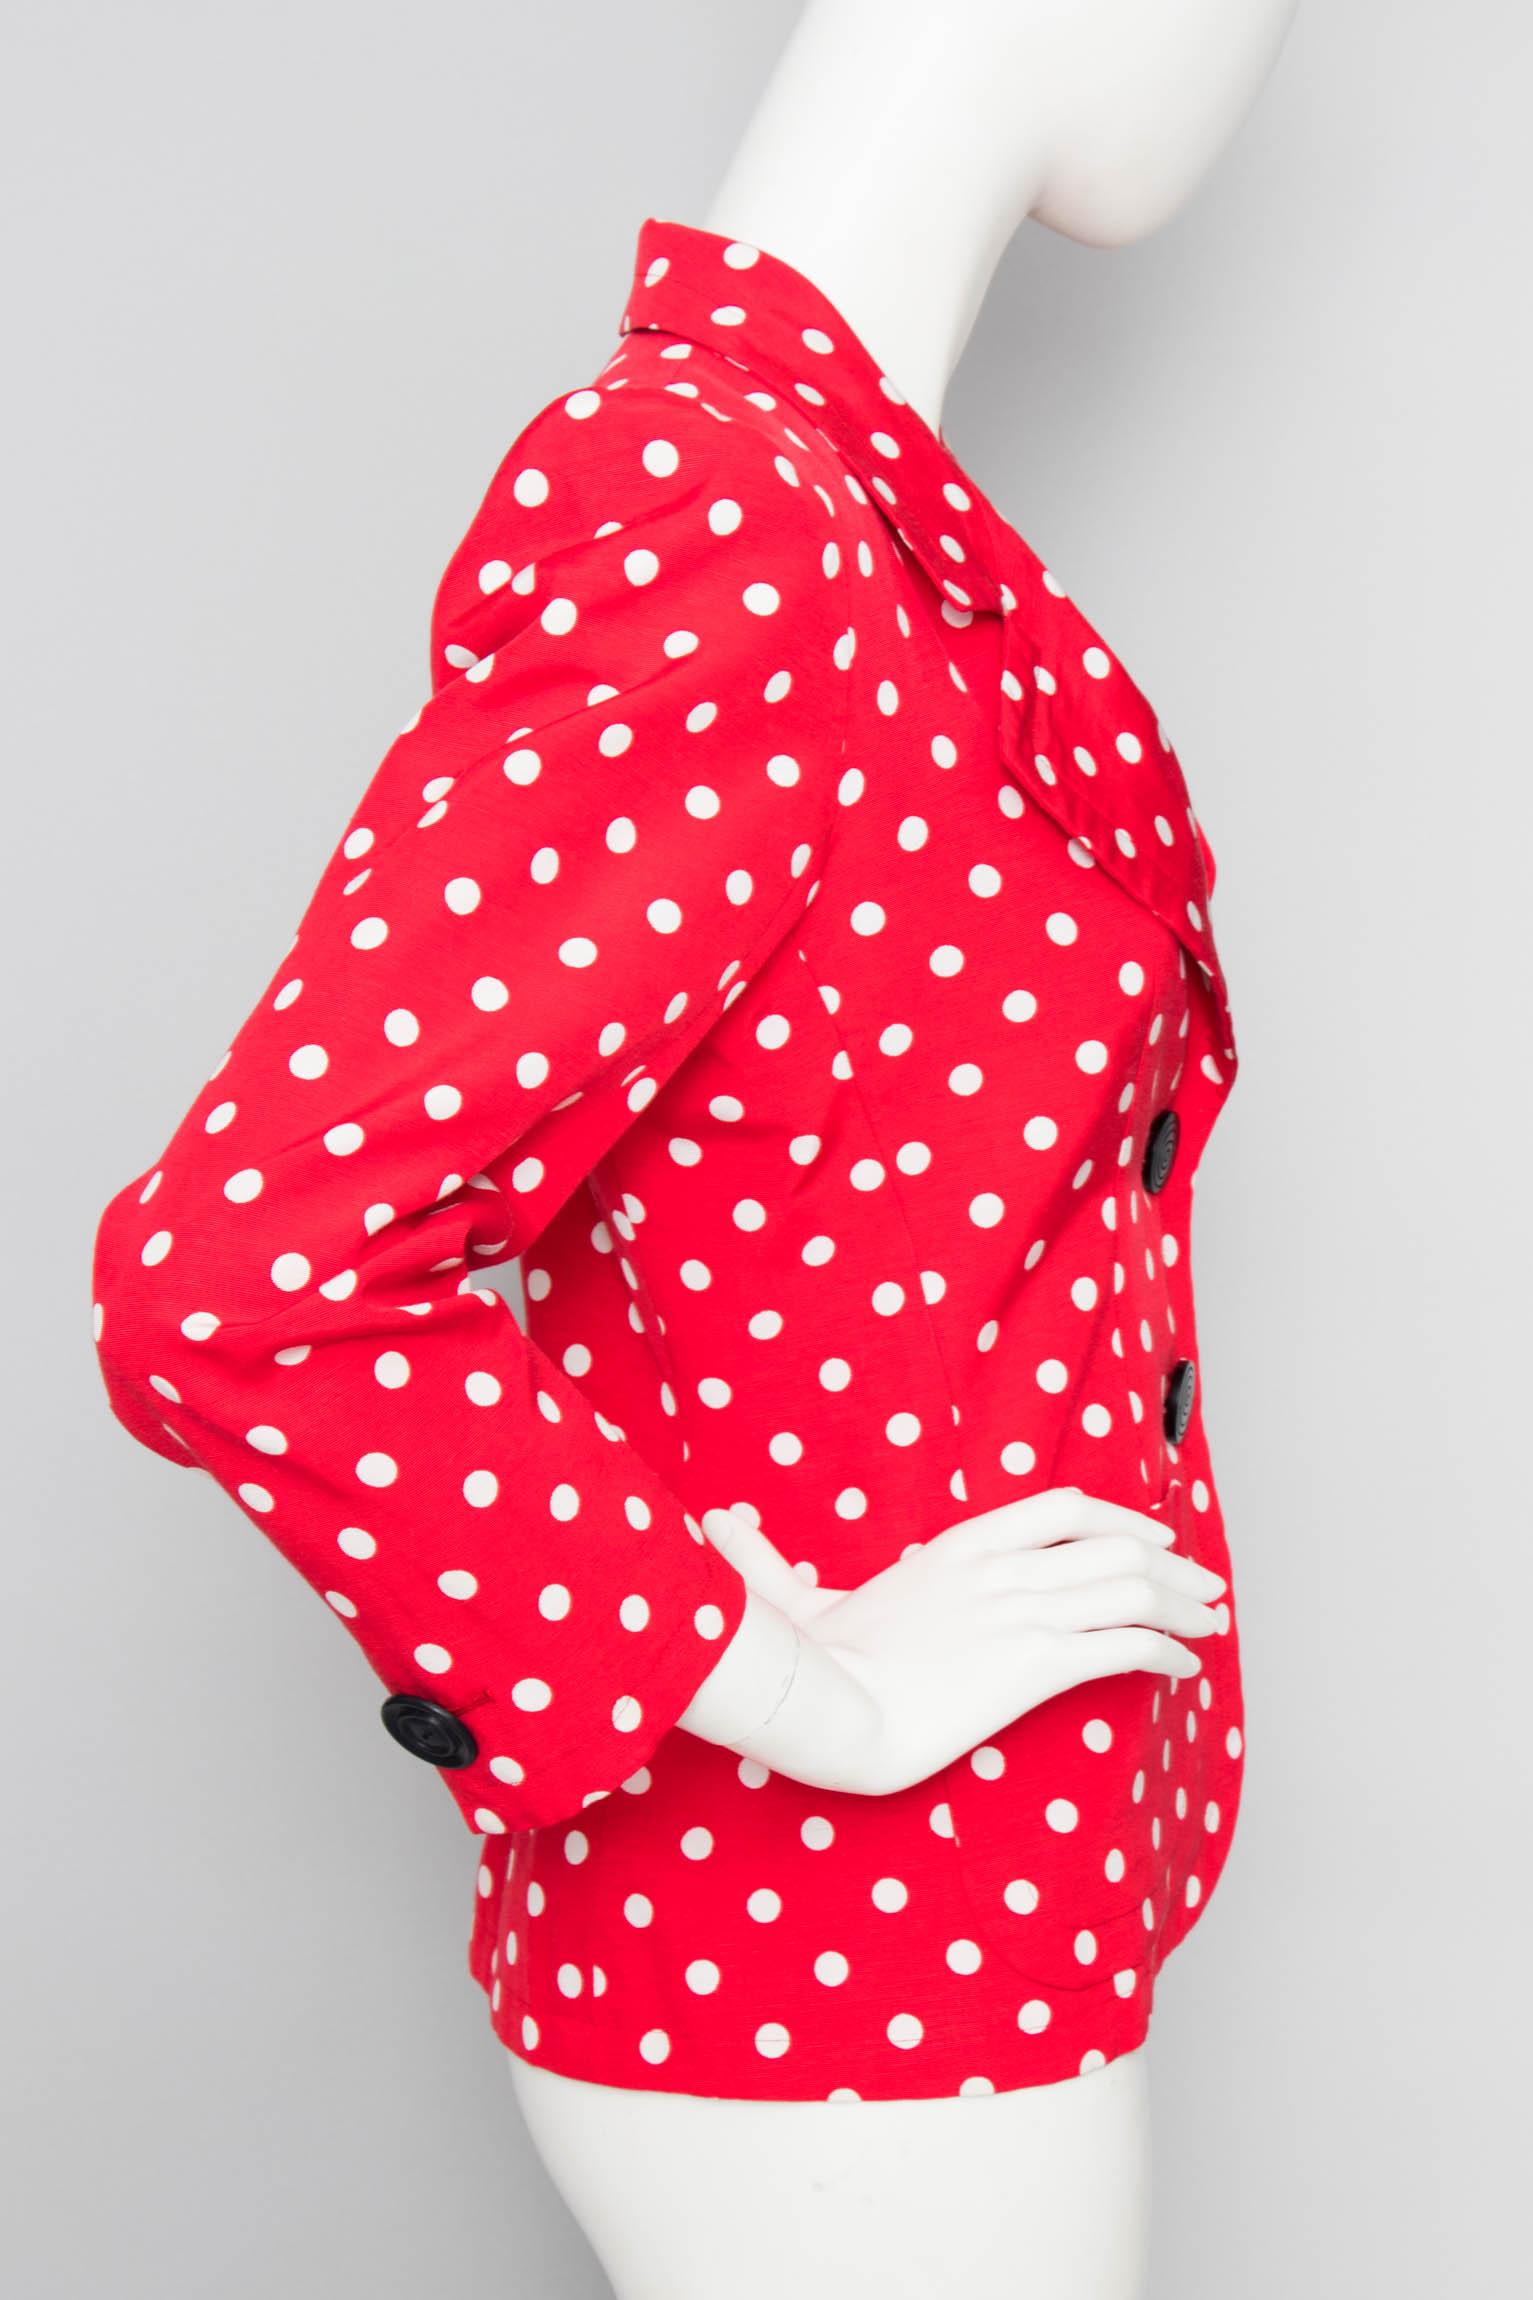 A 1980s Yves Saint Laurent bright red Rive Gauche blazer with white polka dots and large black buttons. The jacket has exaggerated shoulders, a narrow waist and long sleeves that all give the right 1980s glamour. The jacket is fully lined. 

The